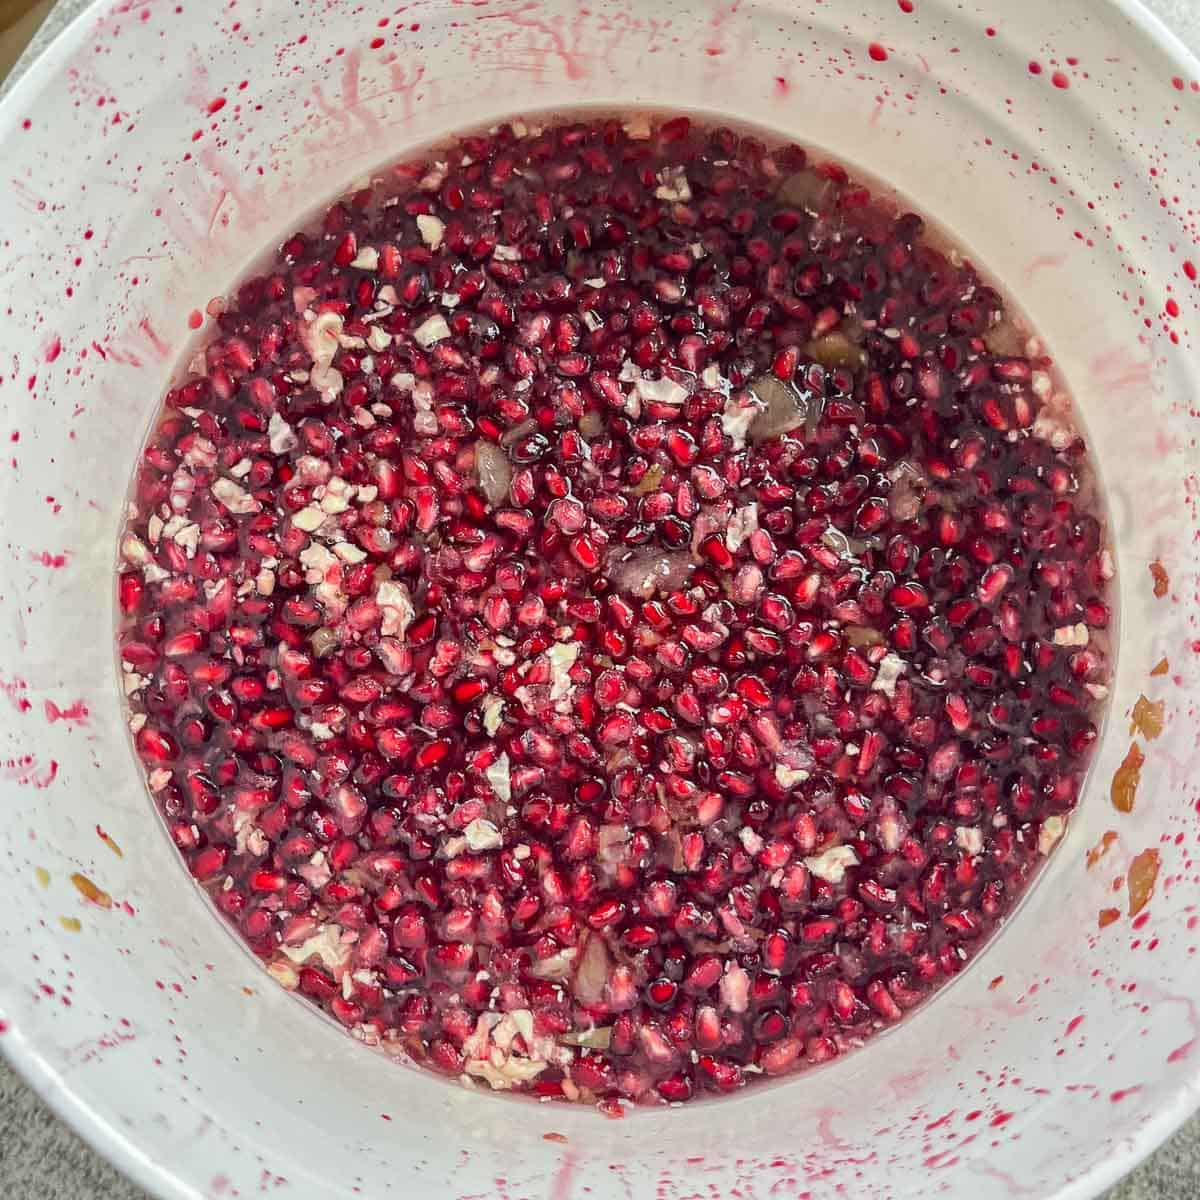 pomegranate seeds being fermented for wine